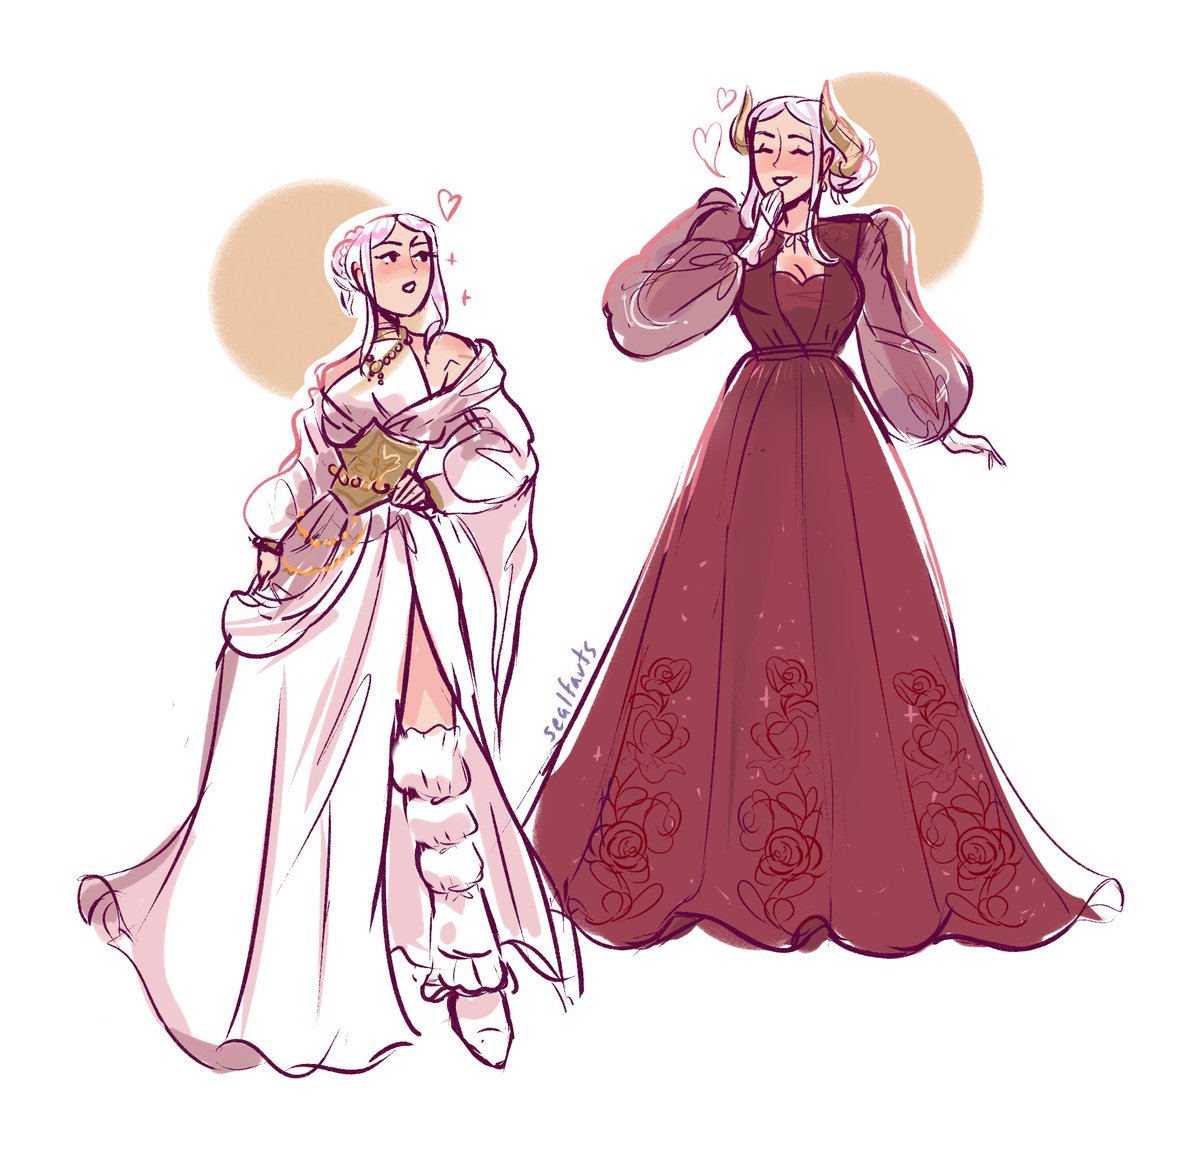 edelgard outfit requests! #fe3h